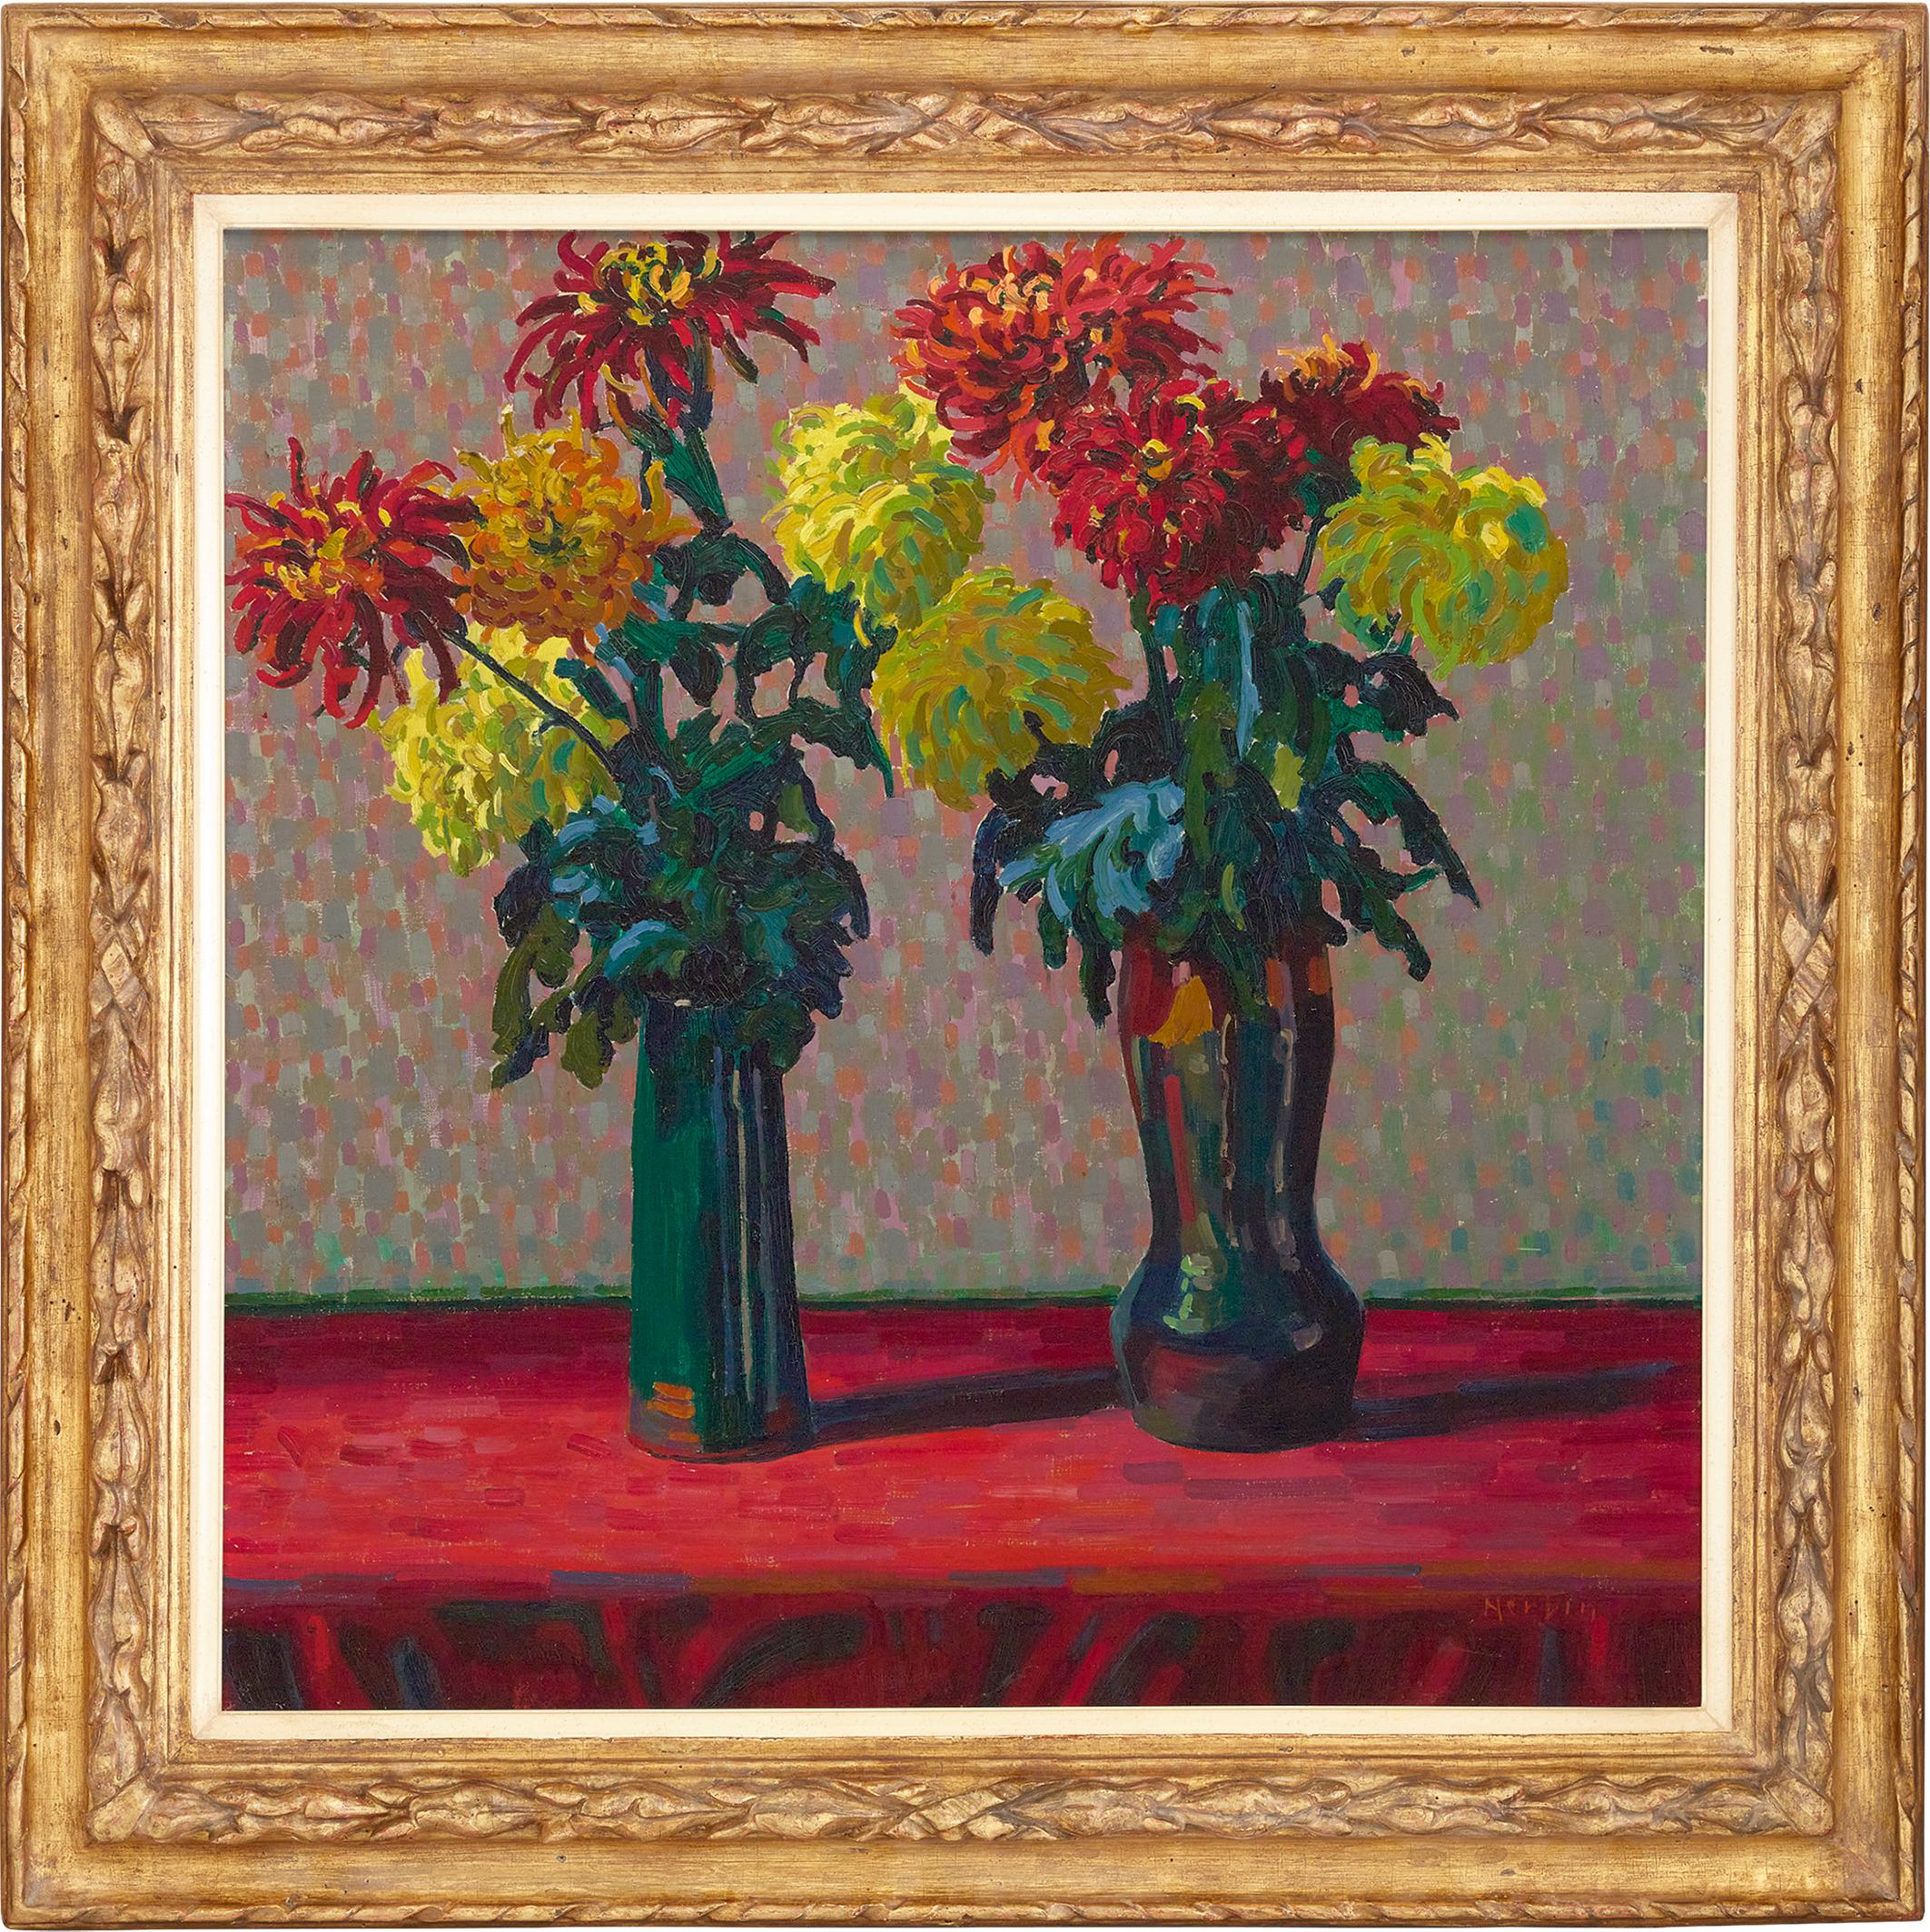 Auguste Herbin
1882-1960  French

Vases aux chrysanthèmes

Signed 'Herbin' (lower right)
Oil on canvas

This bold and vivid still life was composed by French painter Auguste Herbin, a pioneer in popularizing Modernist abstraction. Over his expansive